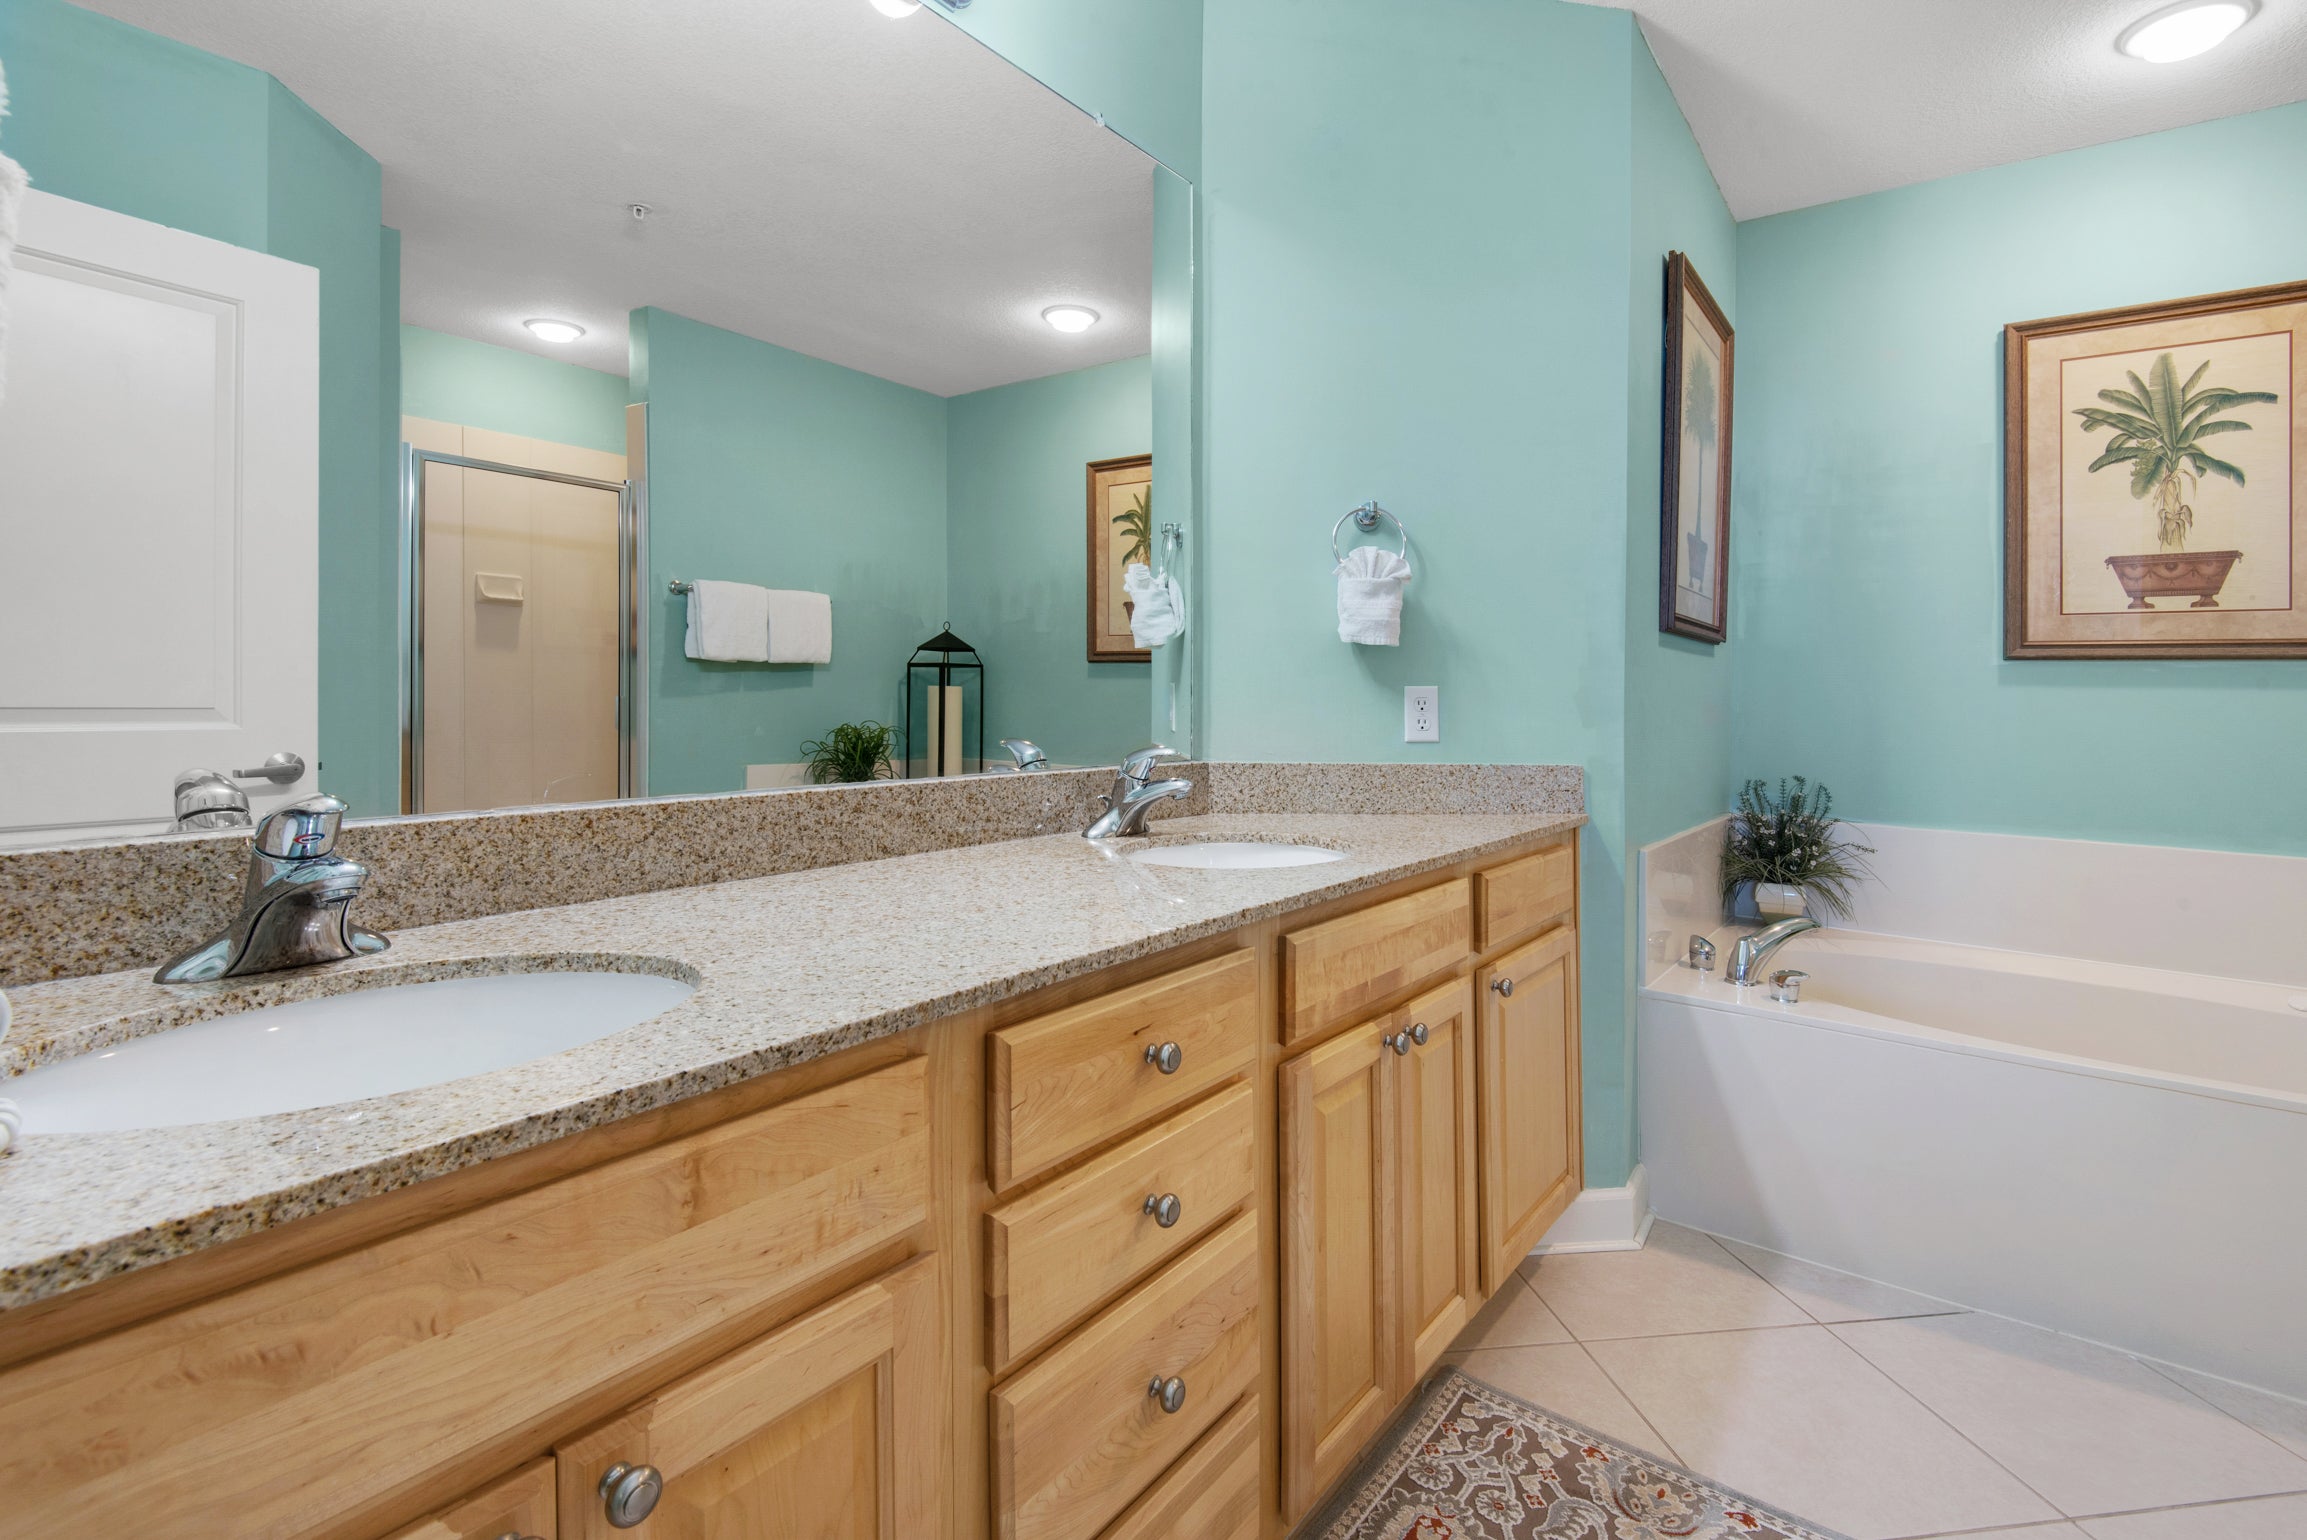 Master bathroom with double sinks